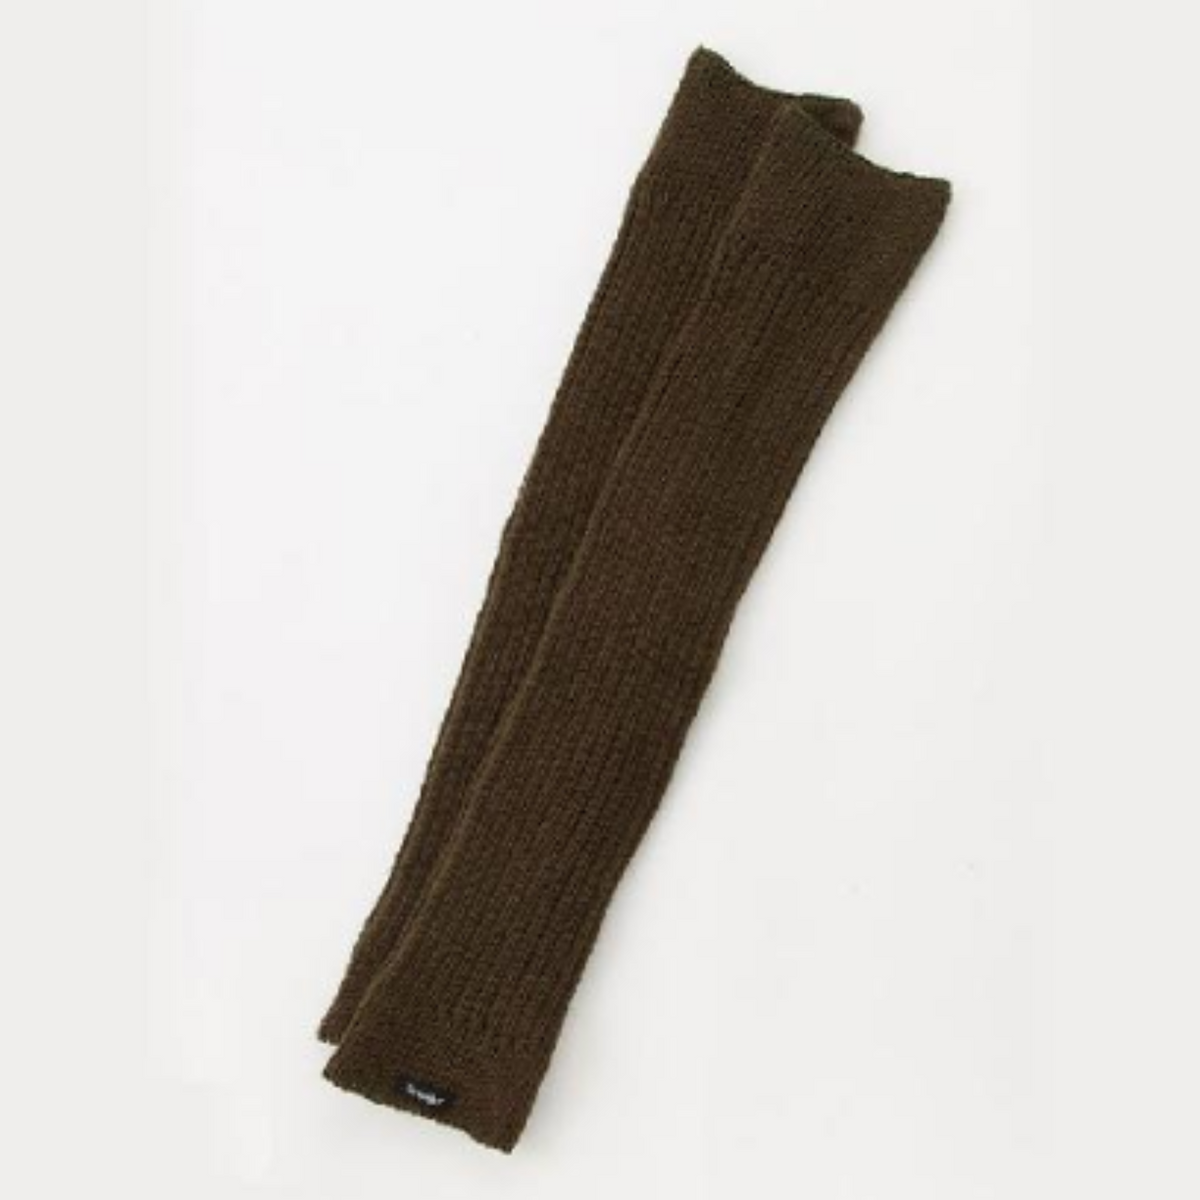 Knitido Ribbed Leg Warmer in olive on display